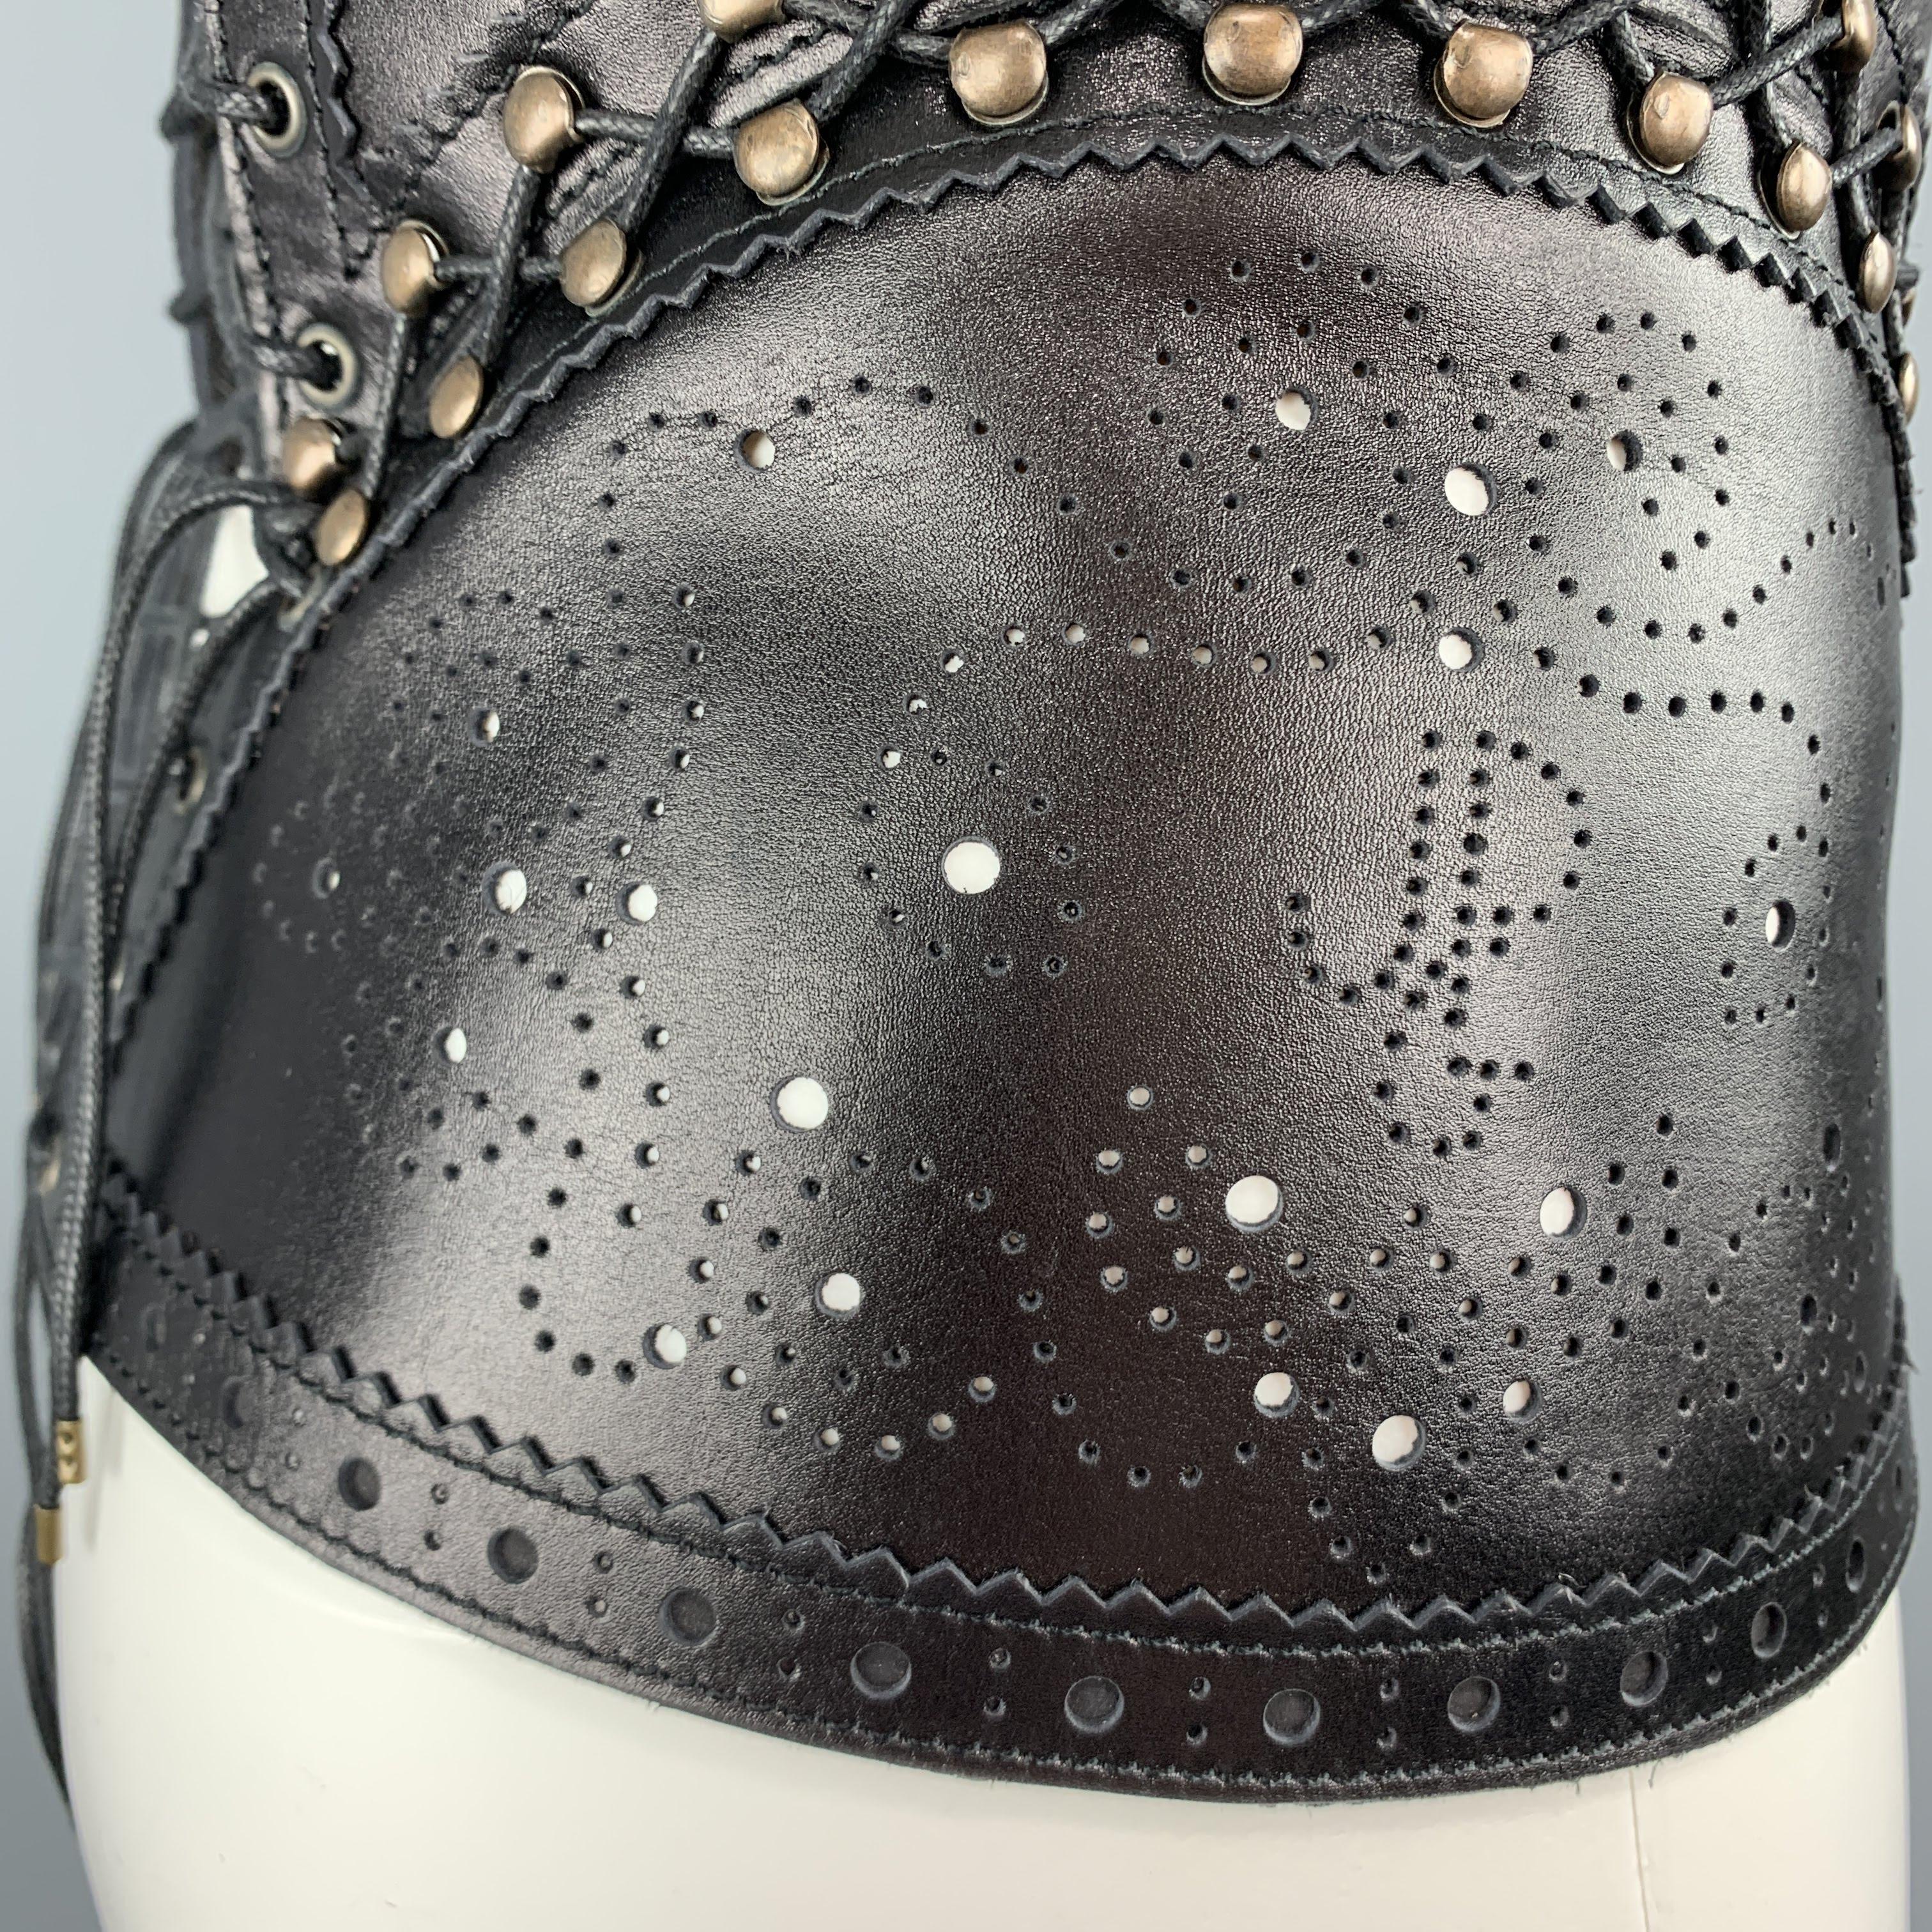 JEAN PAUL GAULTIER Black Leather Perforated Lace Up Whip Stitch Corset Belt 1